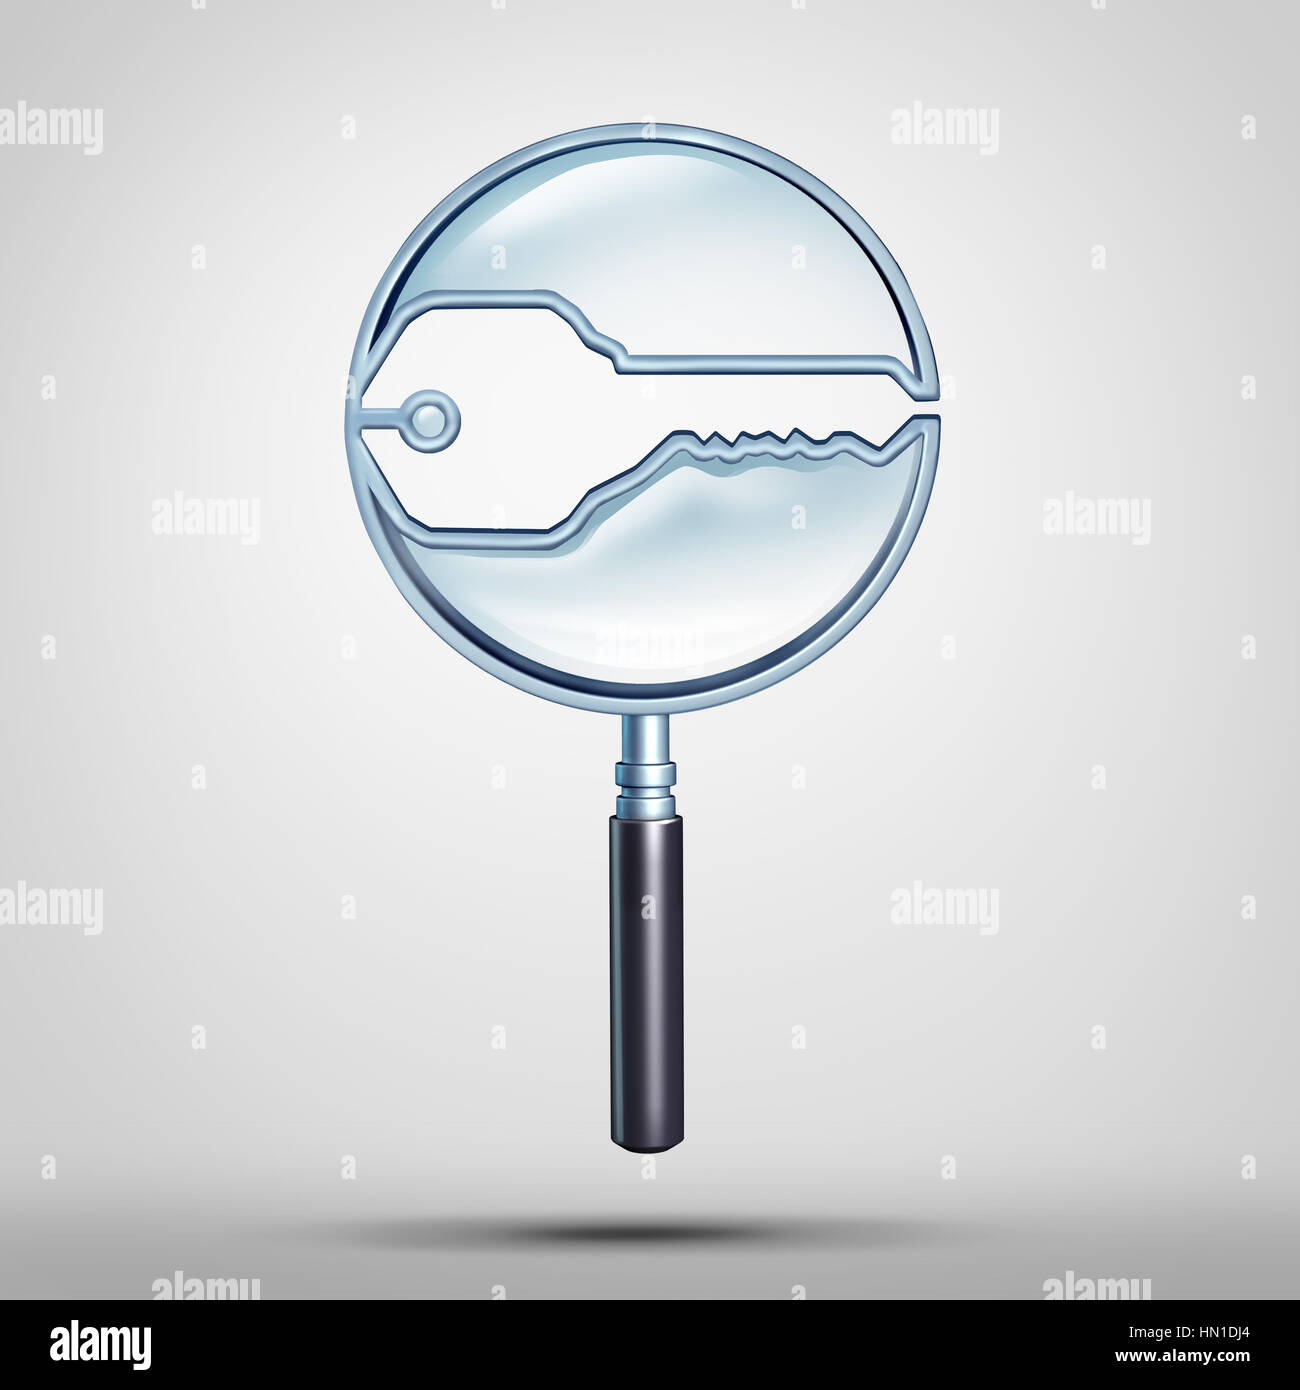 Key Search symbol and browser solution or career searching success symbol as a magnifying glass shaped as an open lock tool icon as a 3D illustration. Stock Photo